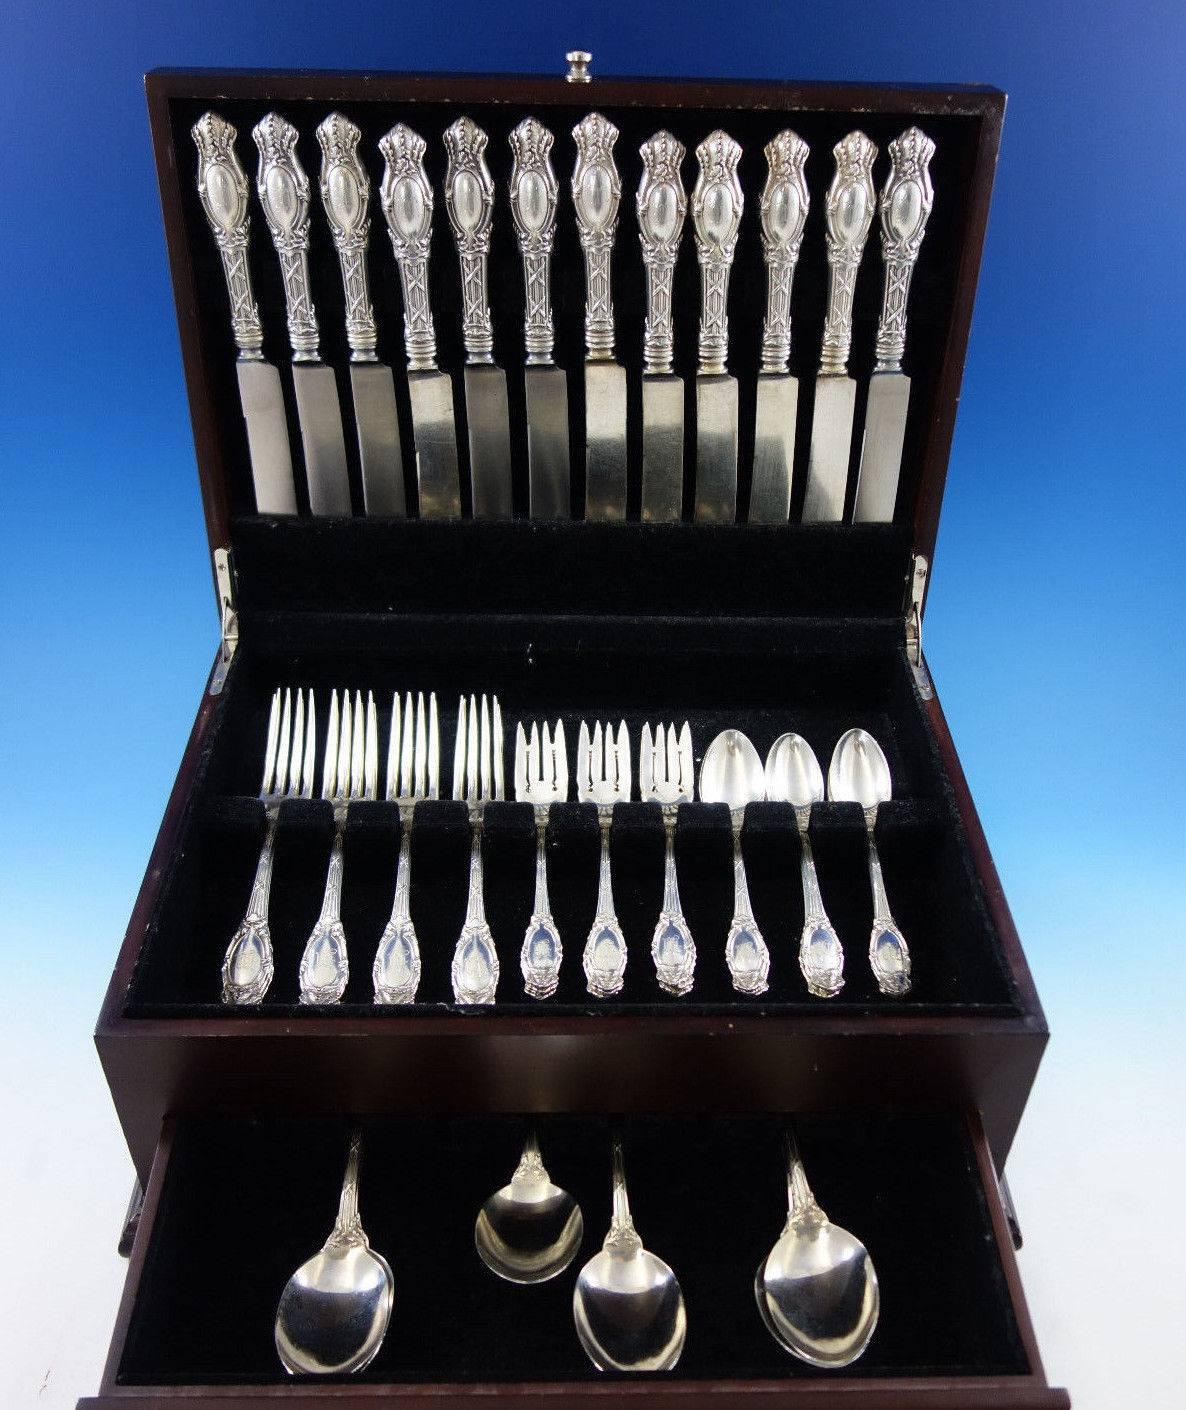 Dinner size Abbottsford by international sterling silver flatware set, 54 pieces. This set includes:

12 dinner size knives, 9 7/8